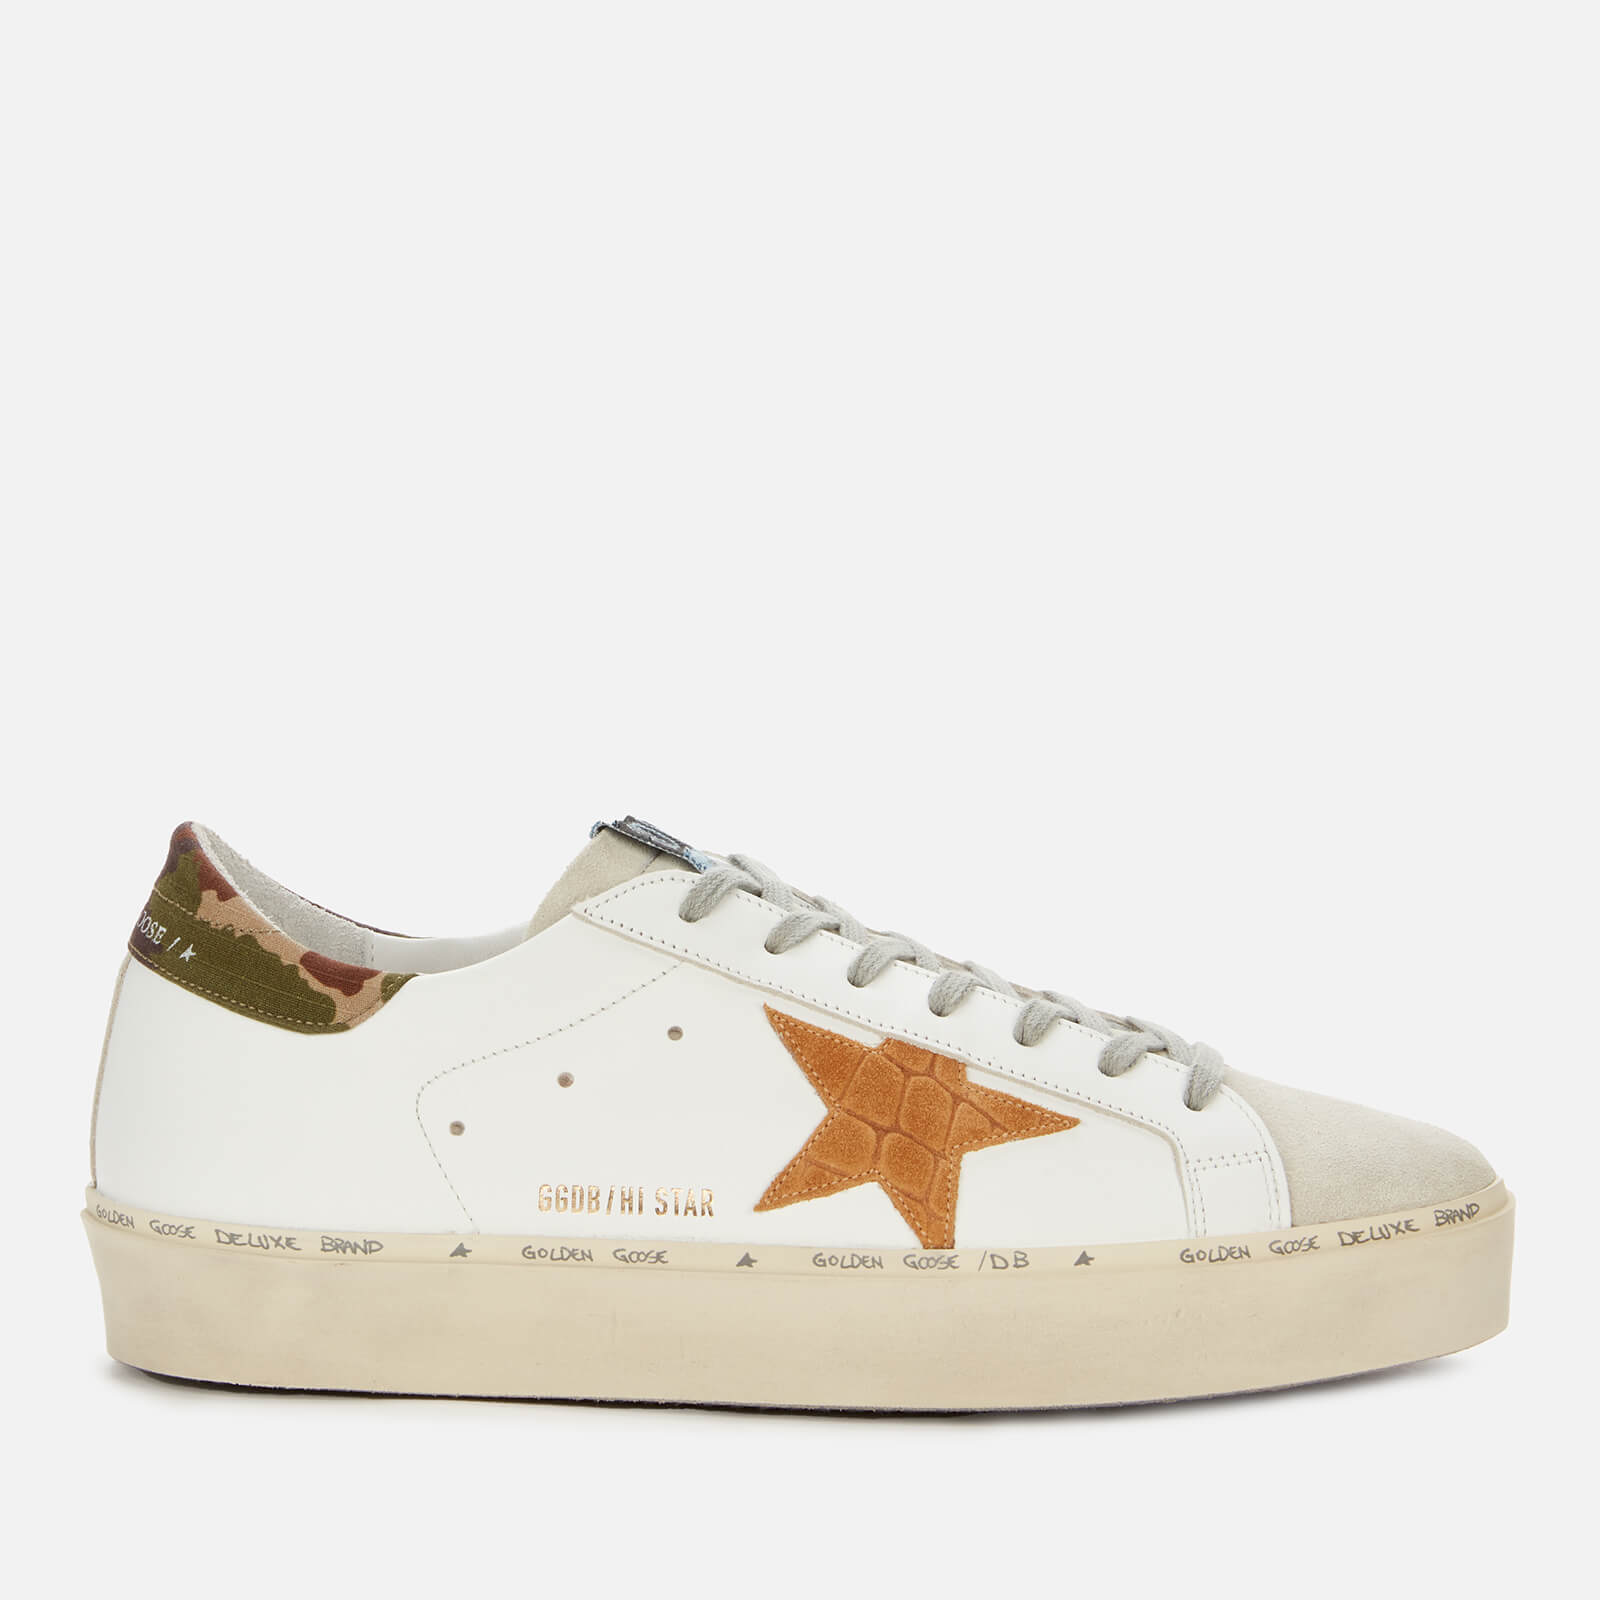 Golden Goose Deluxe Brand Men's Hi Star Leather Trainers - White/Ice/Brown - UK 9